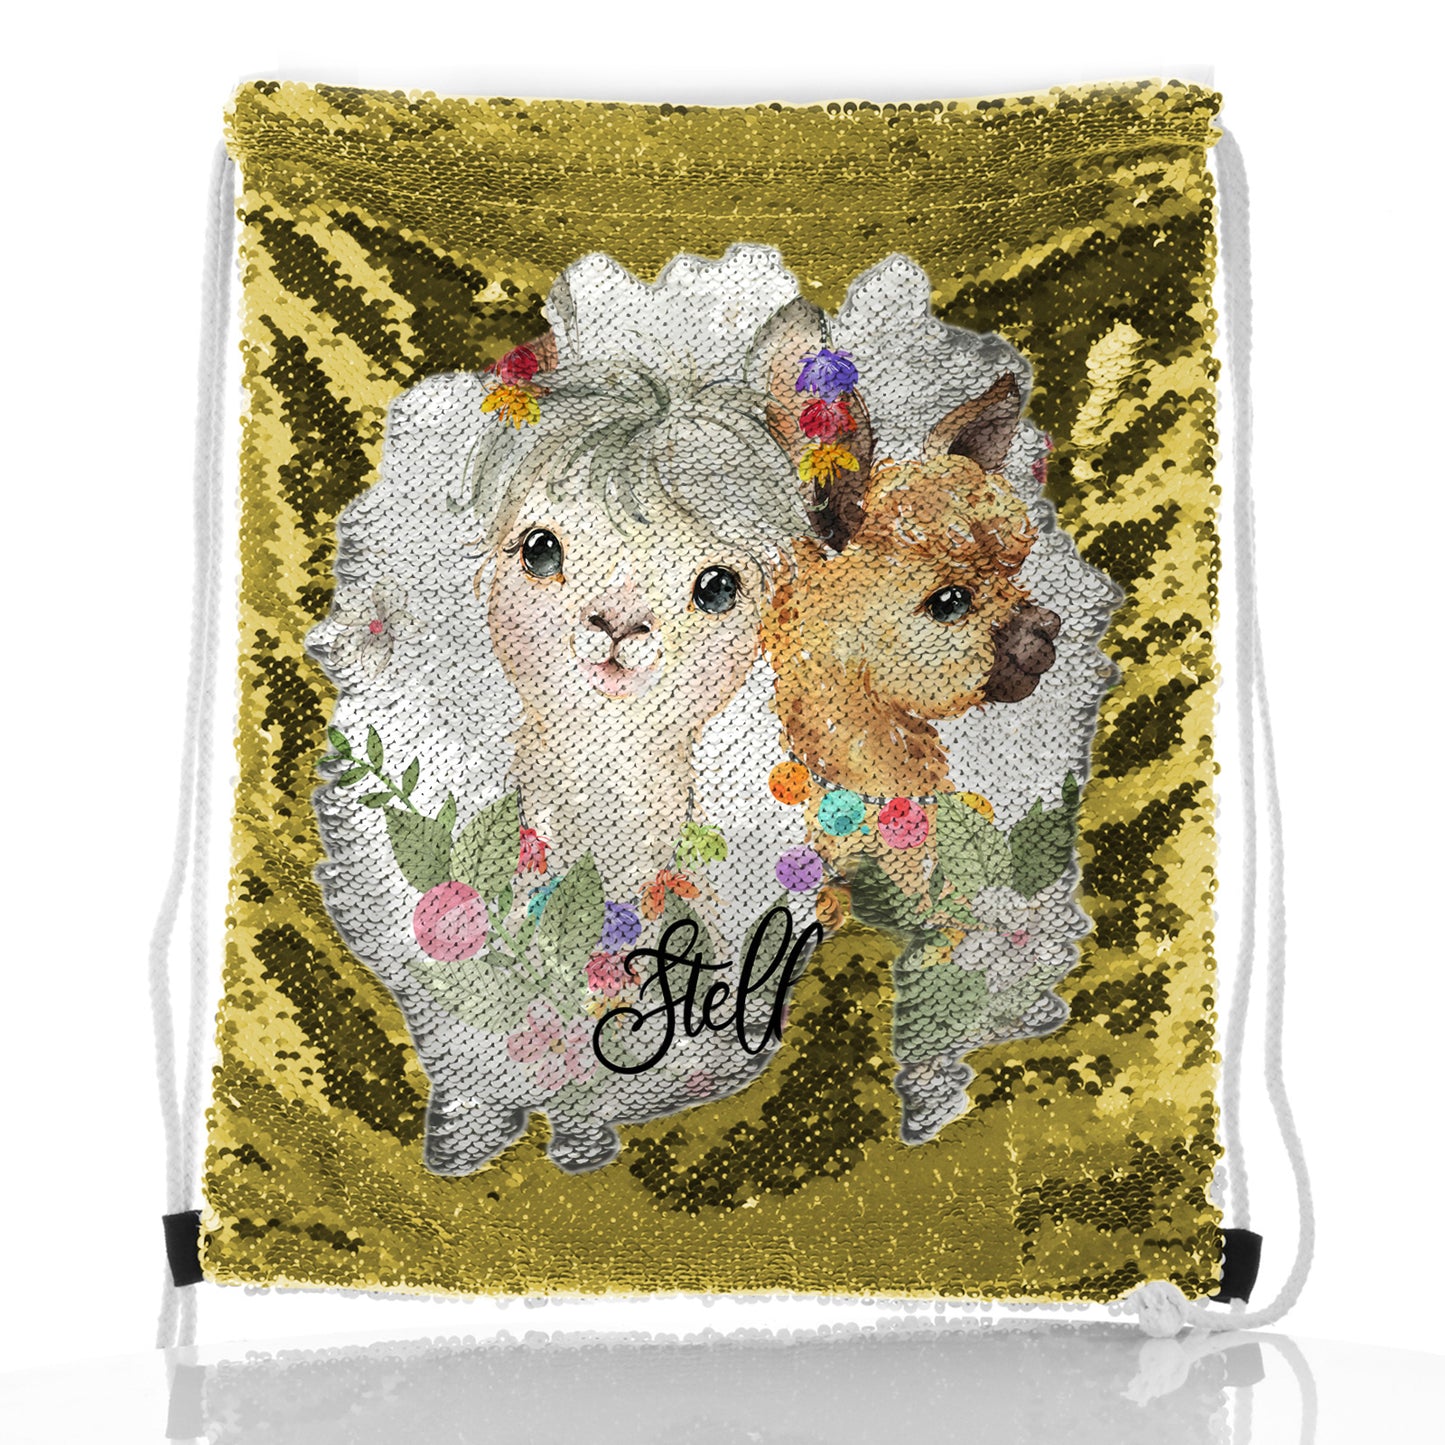 Personalised Sequin Drawstring Backpack with Alpacas Multicolour Baubles and Cute Text